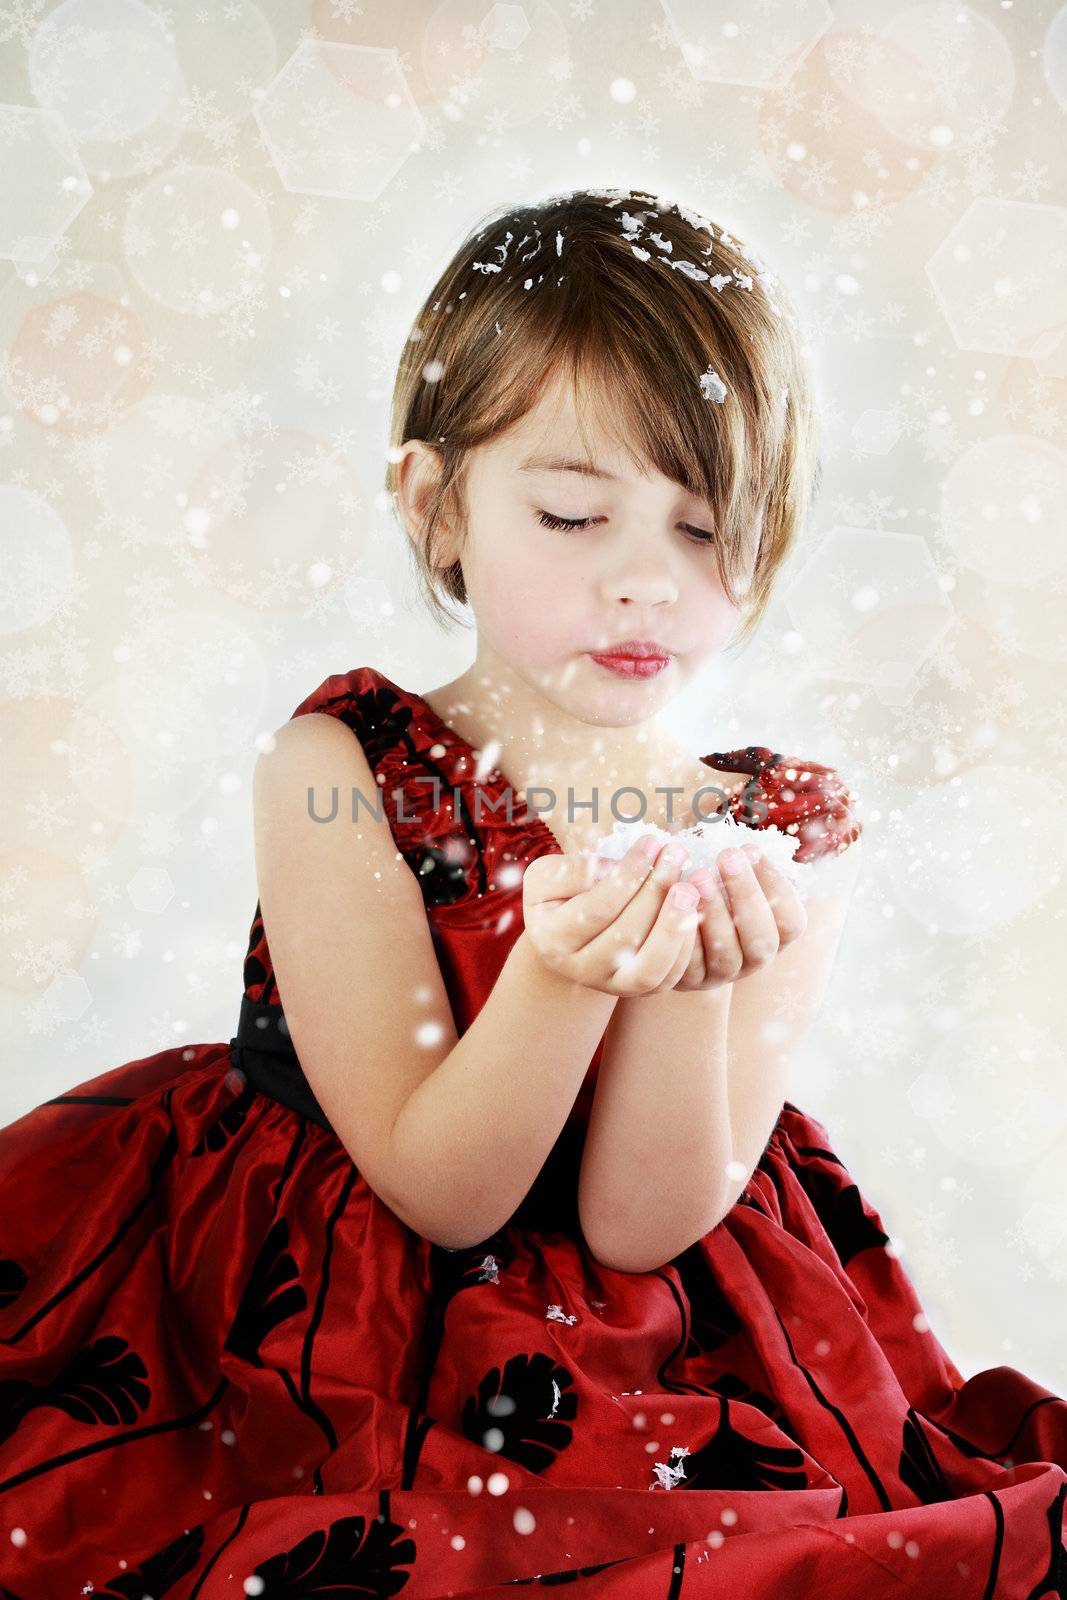 Little girl dressed up for the holidays blows snow from her hands.